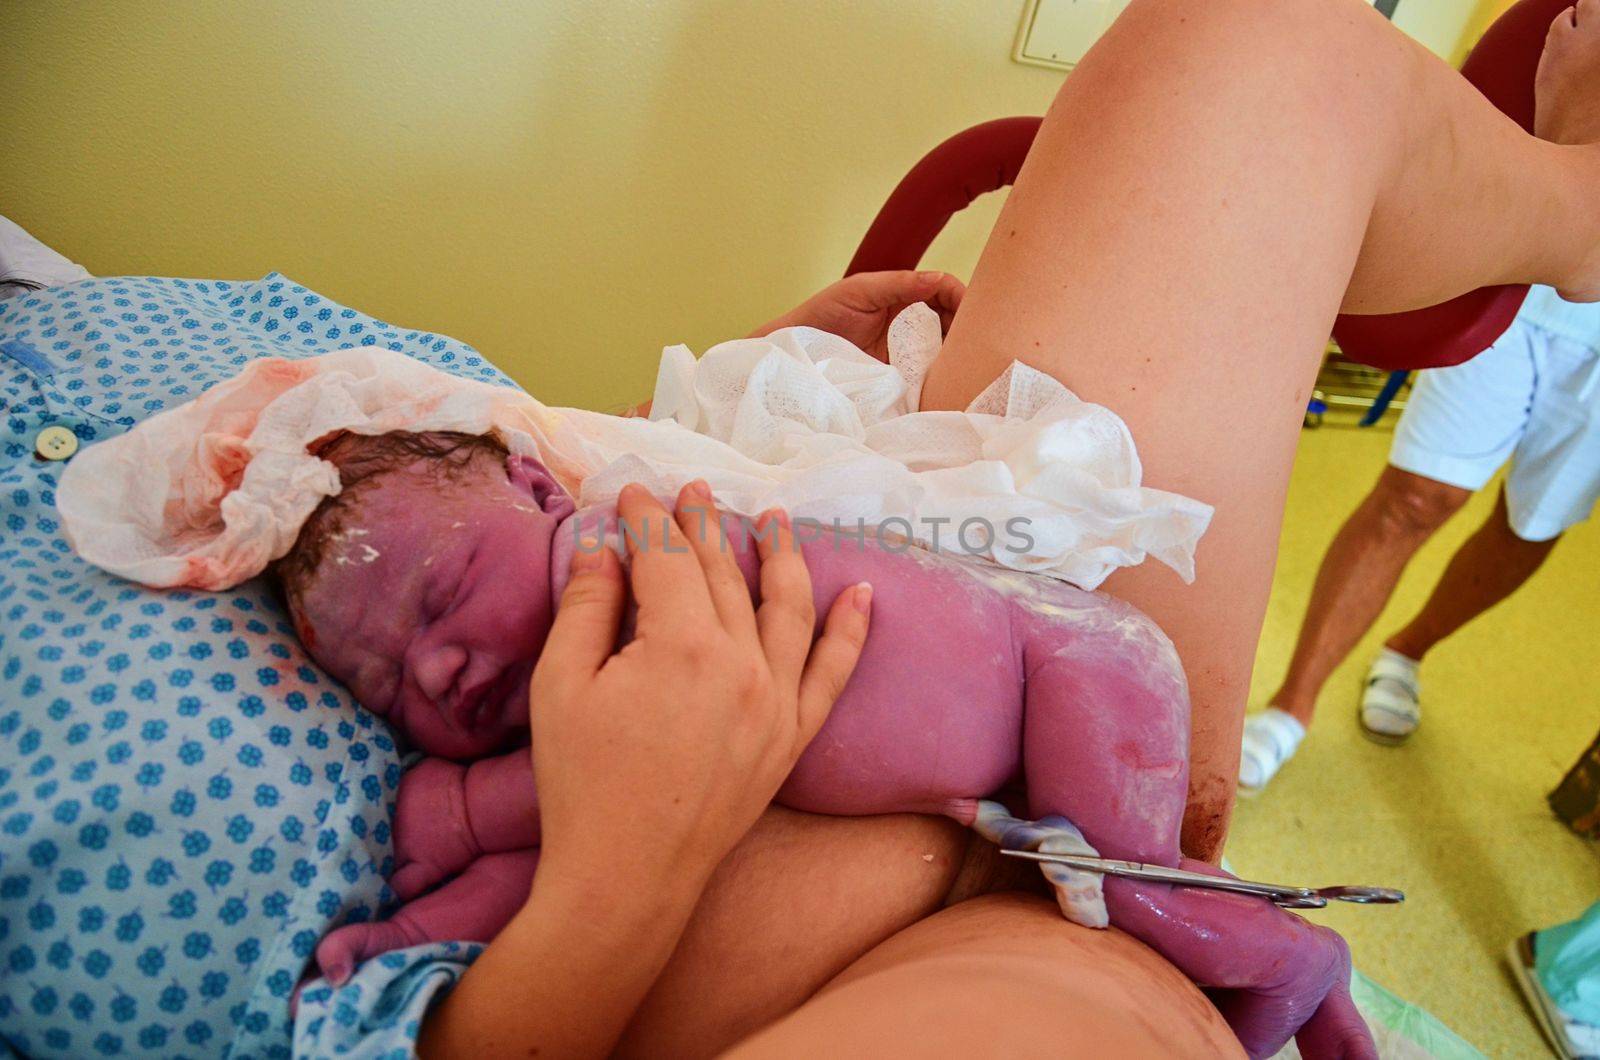 New born baby with umbilical cord after successful childbirth. Real birthing and new born baby in a hospital.